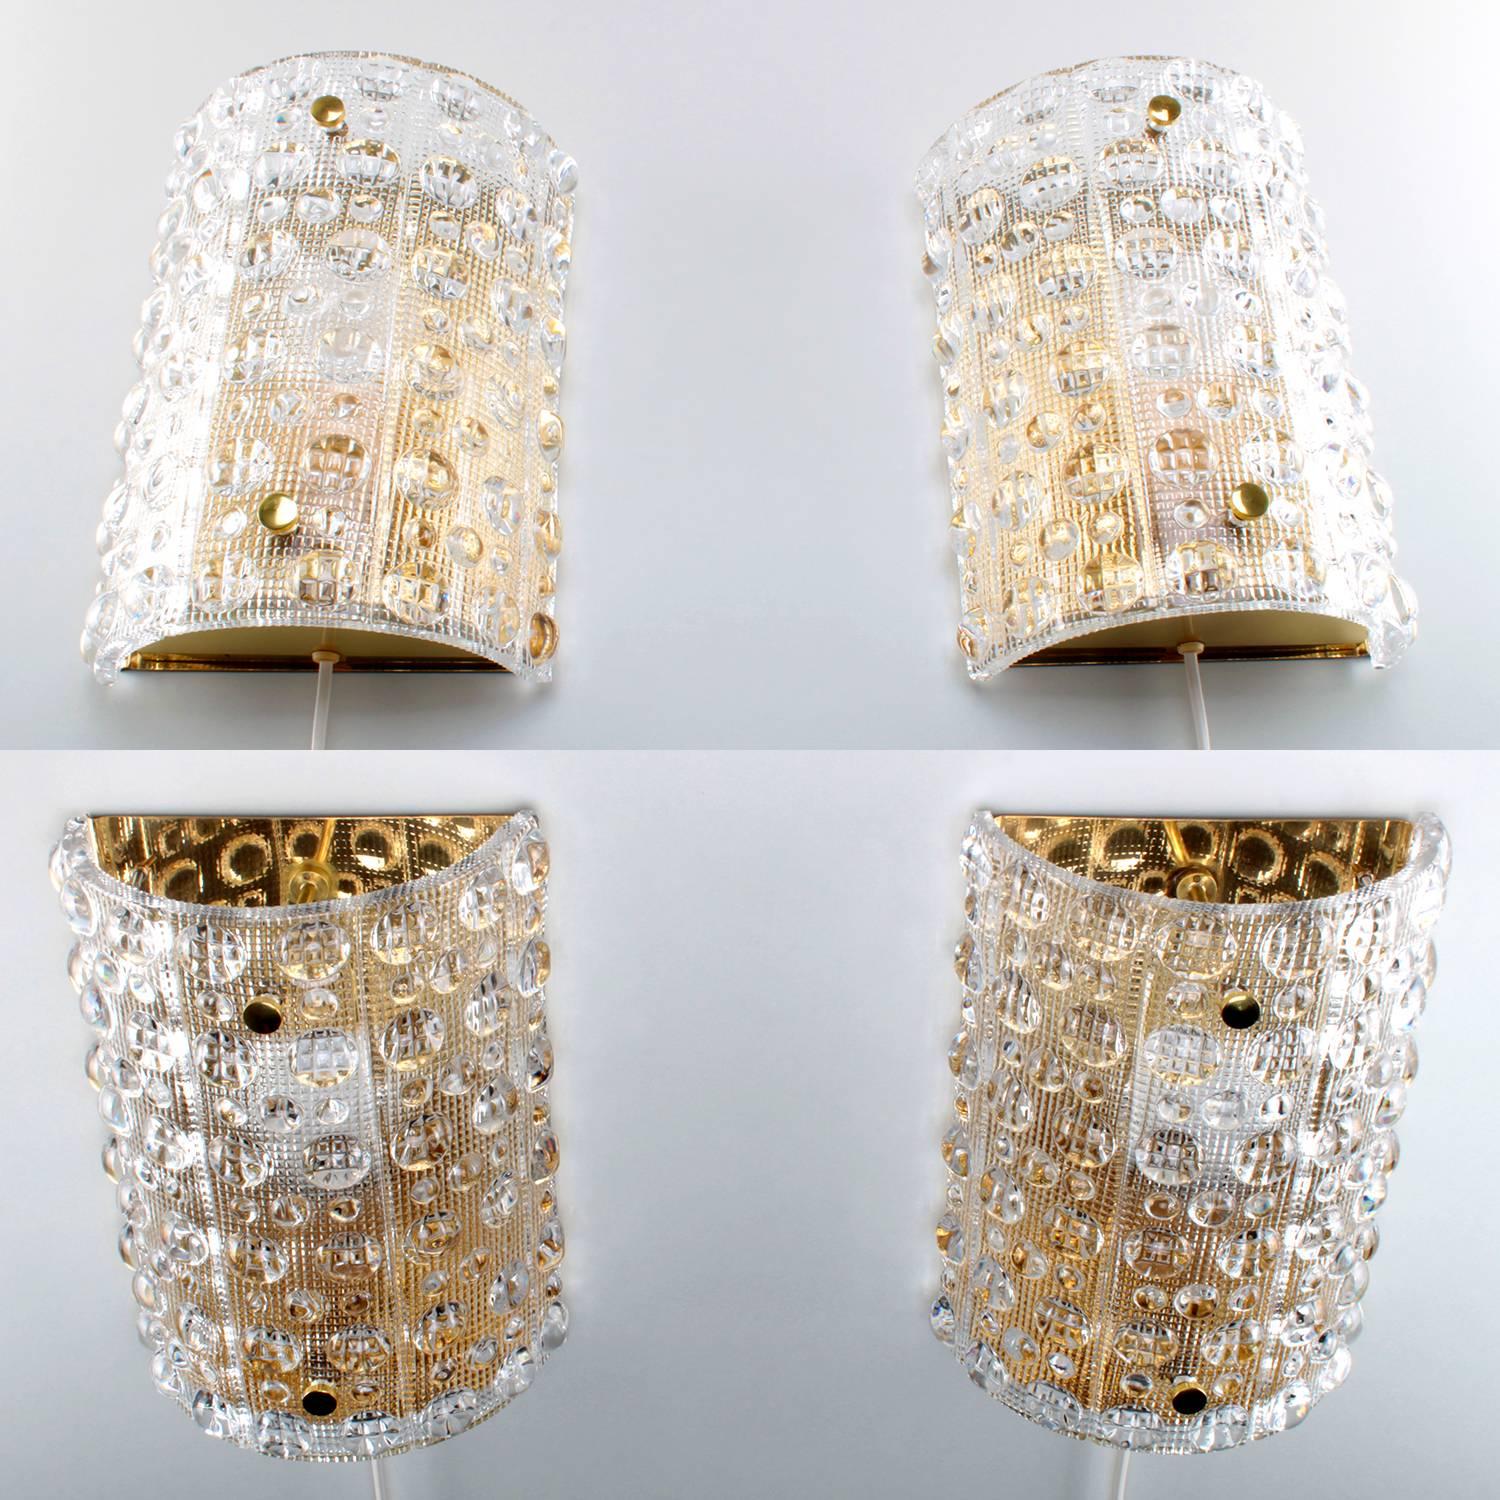 Pair of Crystal Sconces, Wall Lamps, Carl Fagerlund, Orrefors, Rare Wall Lights In Excellent Condition For Sale In Frederiksberg, DK